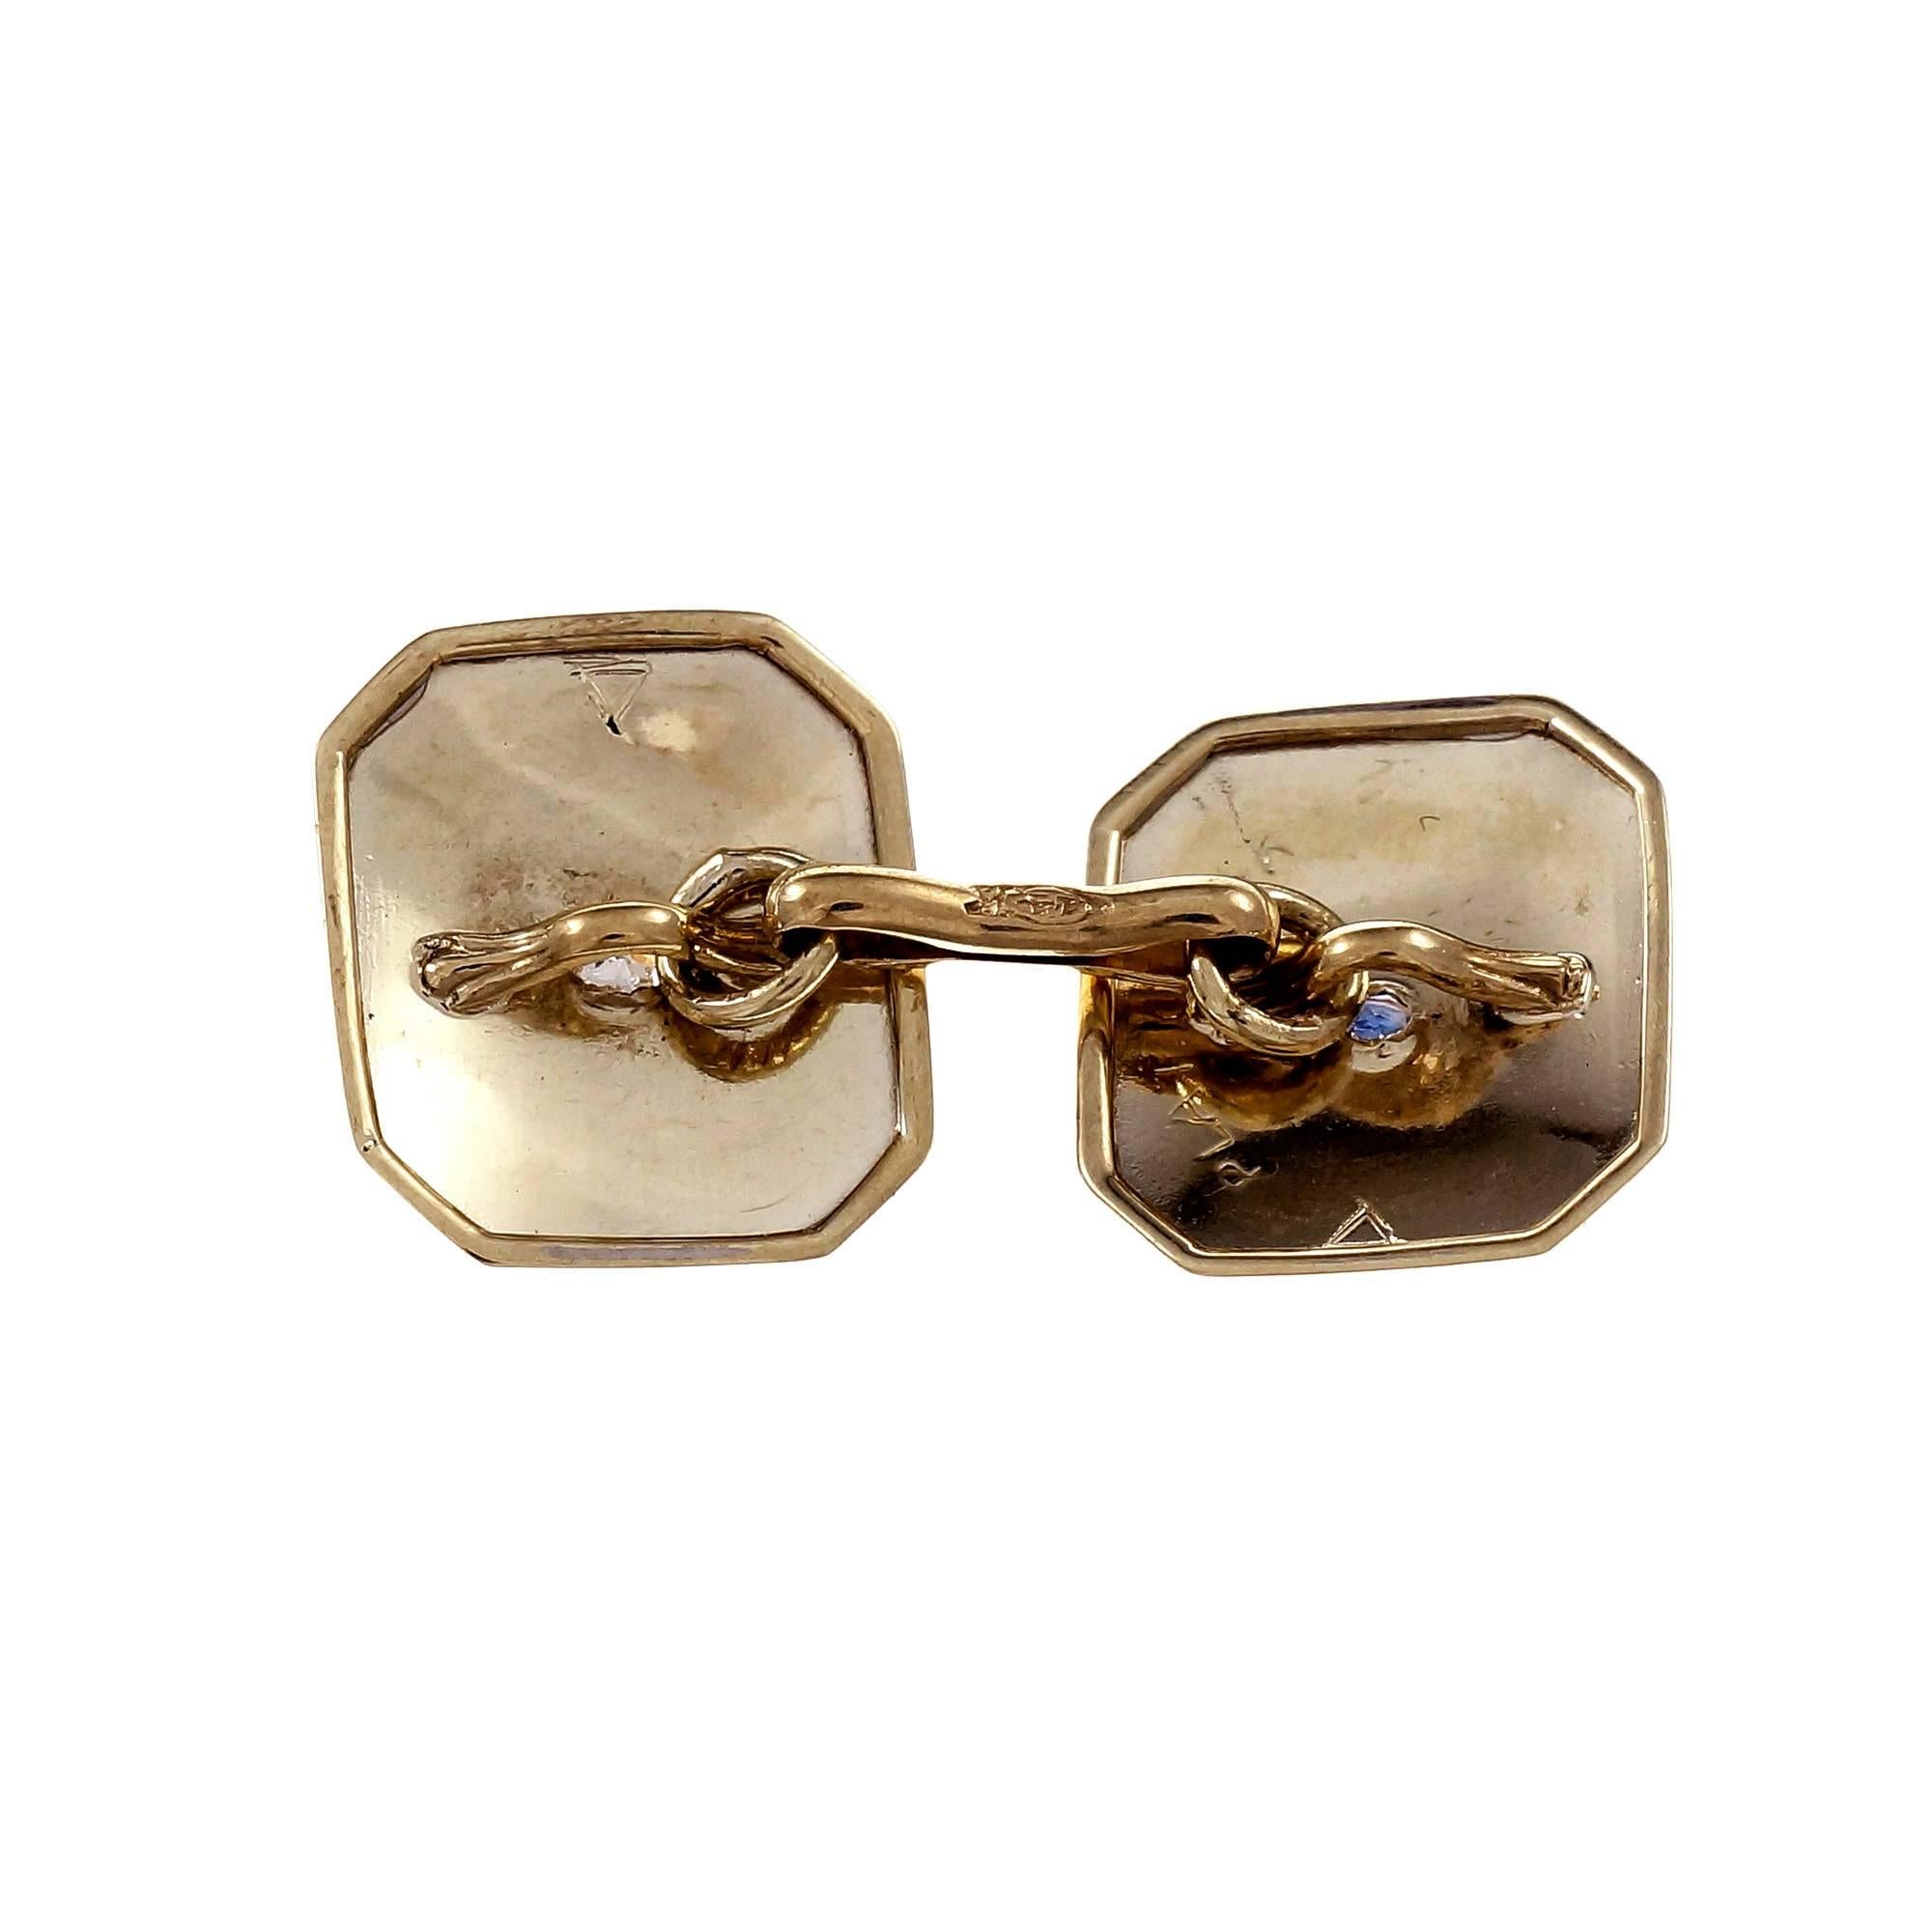 Vintage Platinum 14k yellow gold double sided 1930 cufflinks with Sapphires and old European cut Diamonds.

2 round blue sapphires, approx. total weight .12cts, MI
2 round old European cut Diamonds, approx. total weight .07cts, H, SI
14k yellow gold